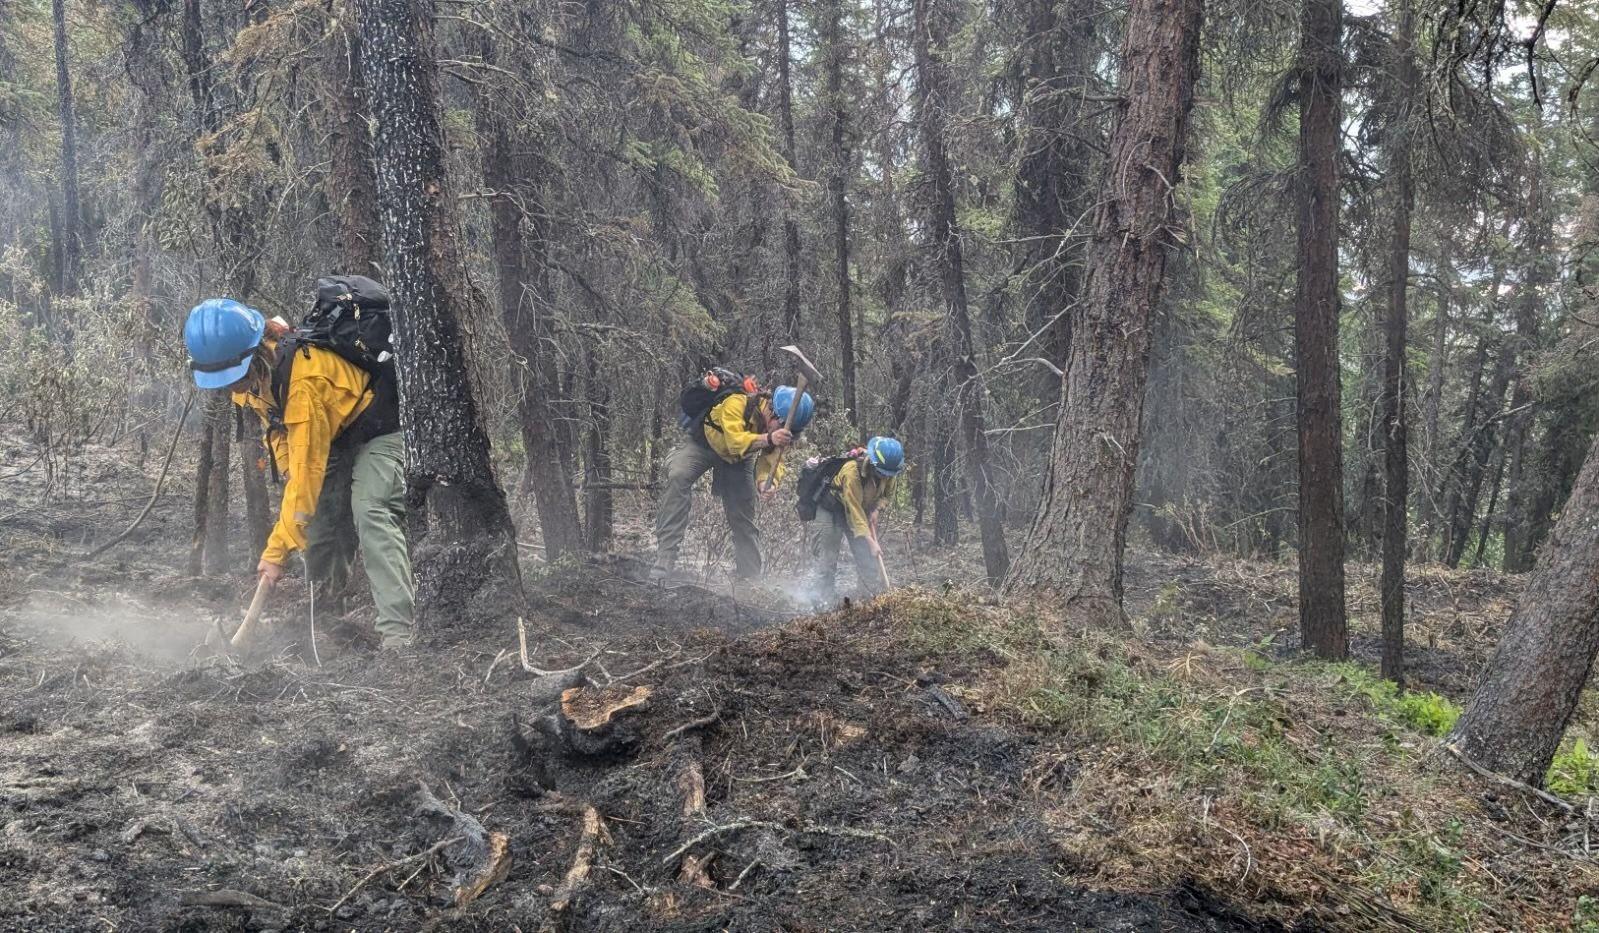 Firefighters use tools on a fireline.